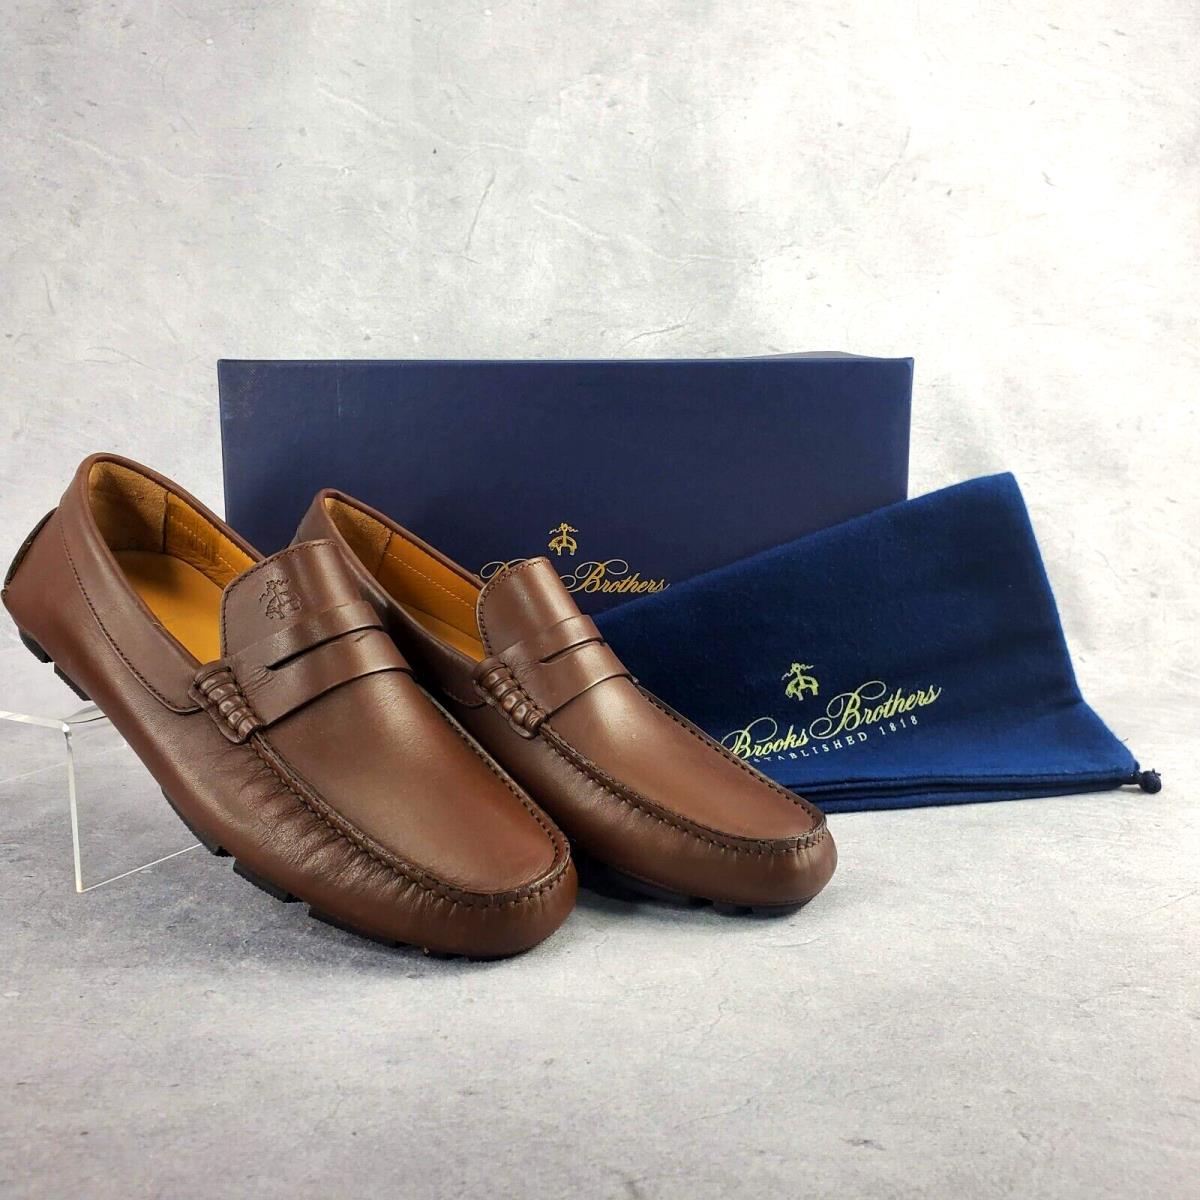 Brooks Brothers Driving Moc Shoes Size 6 Leather Logo Moccasins Penny Loafers